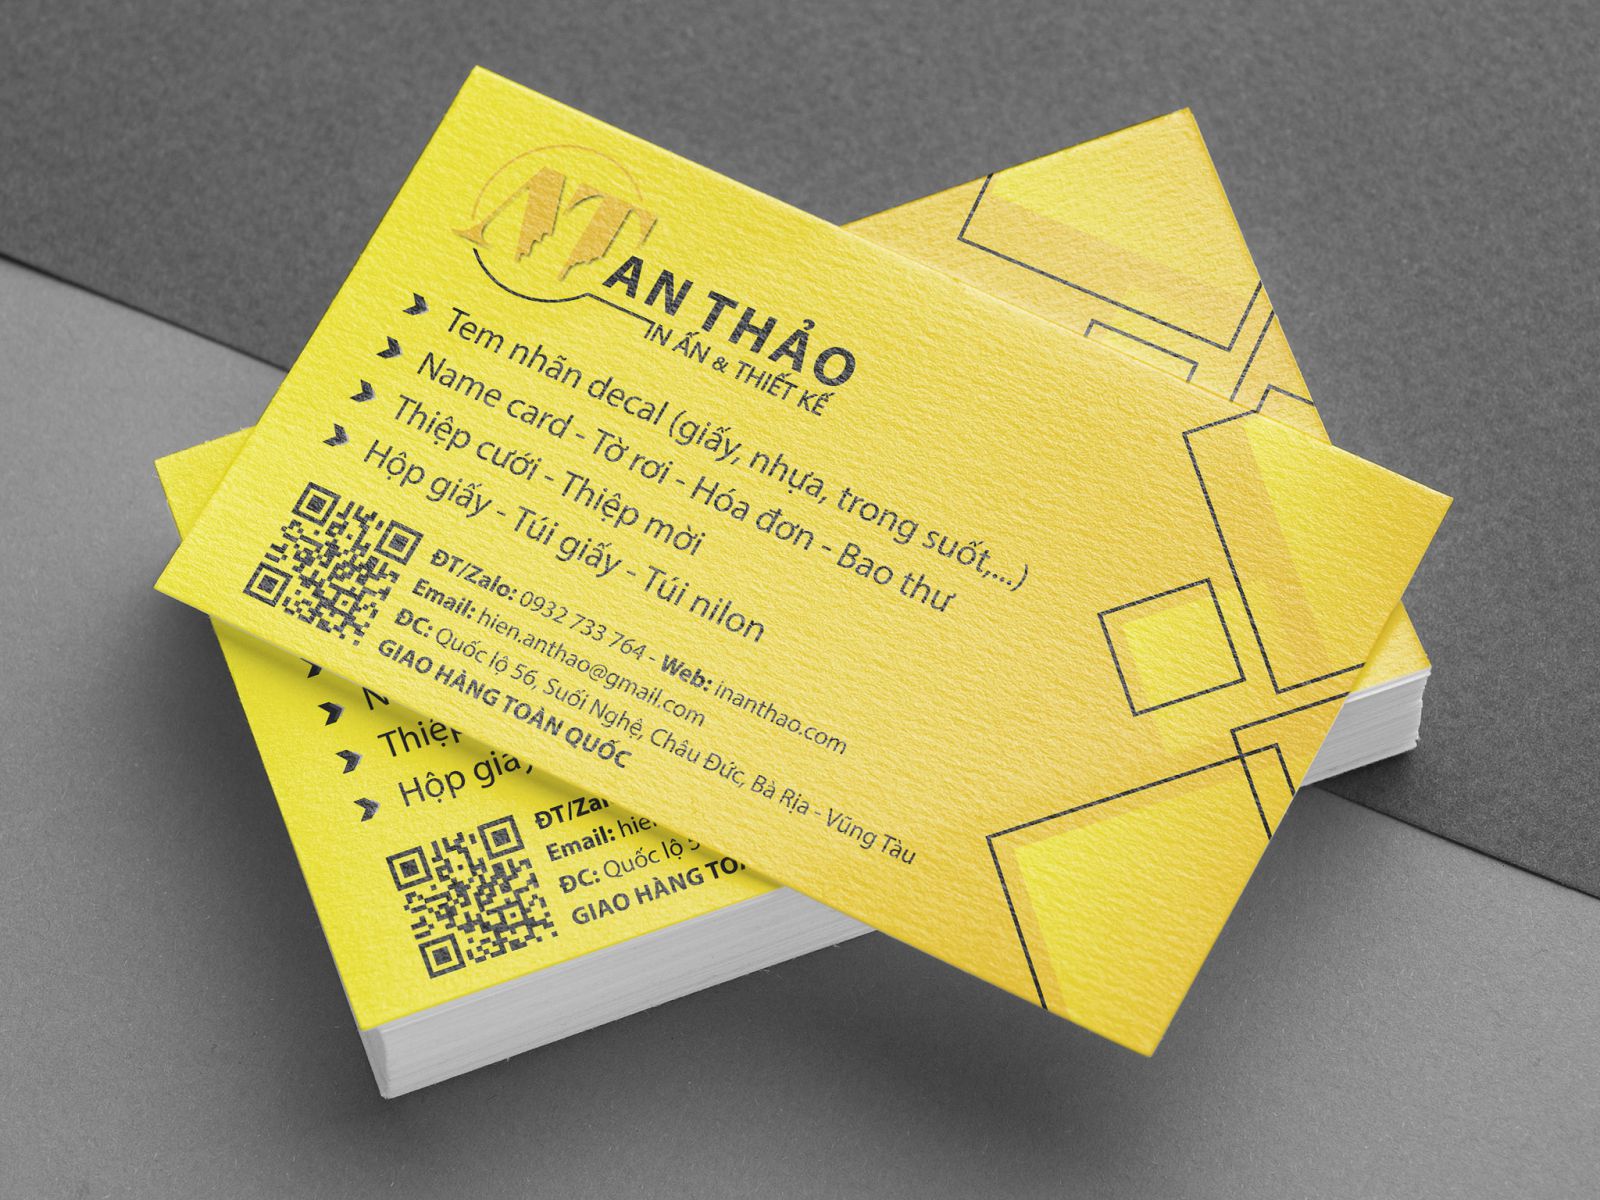 https://inanthao.com/Name Card